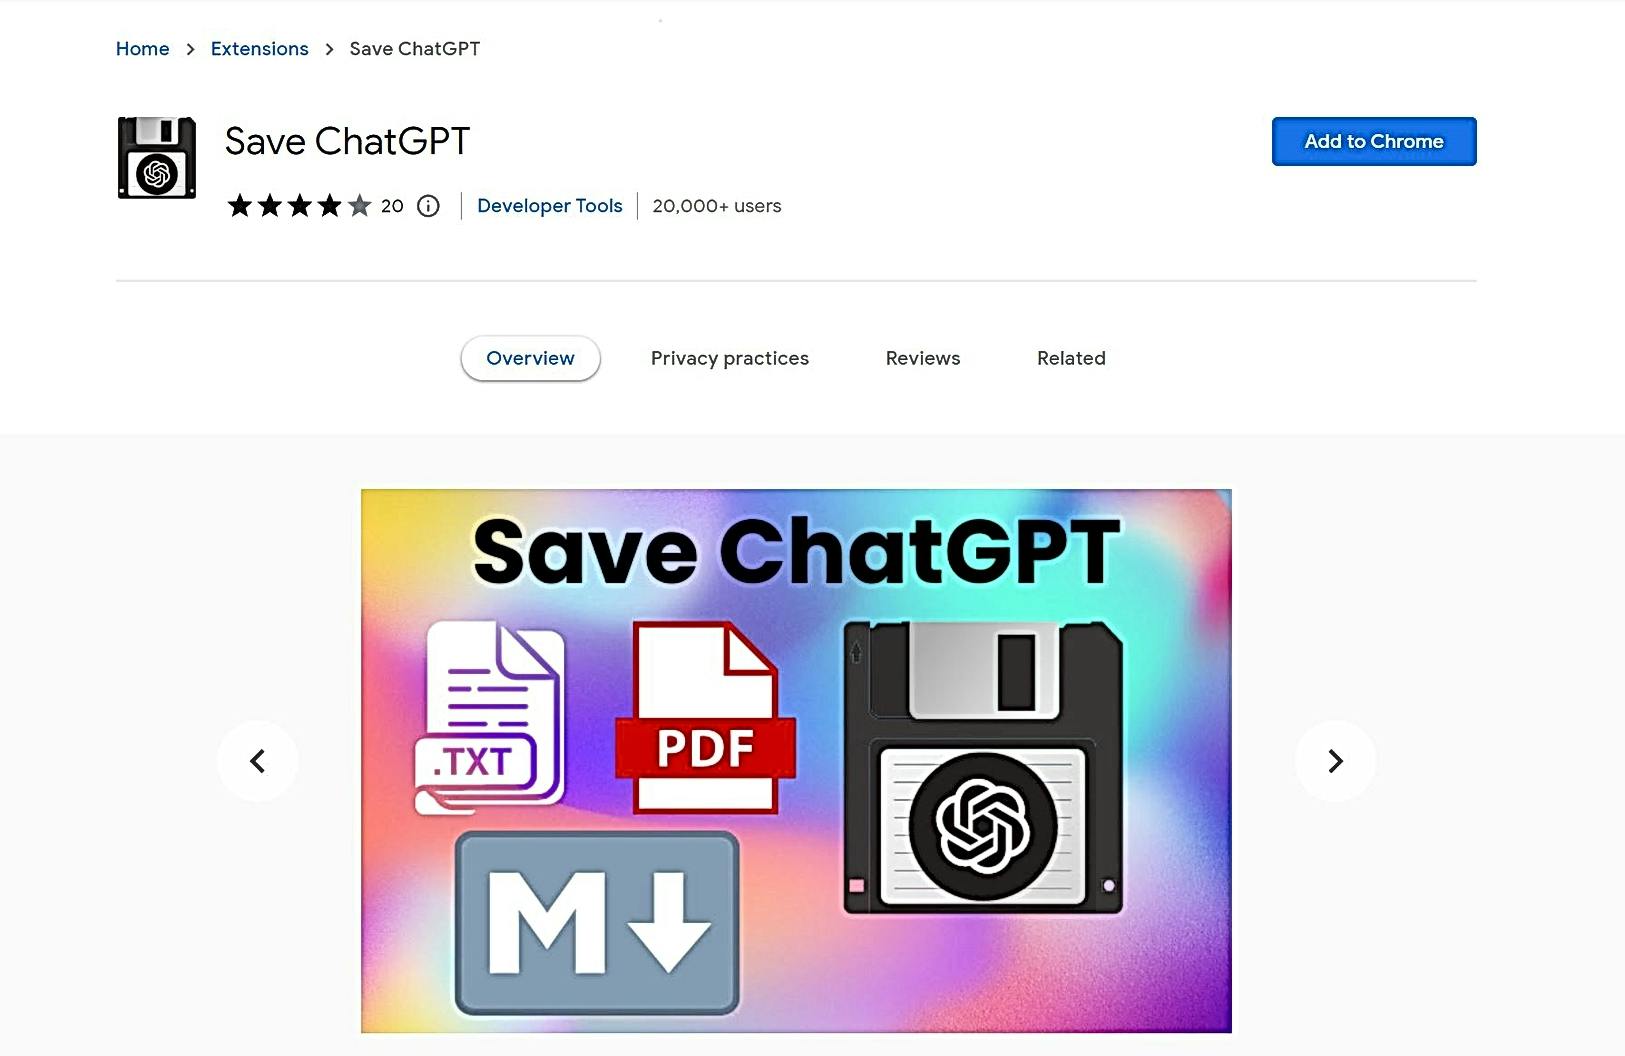 Save ChatGPT featured